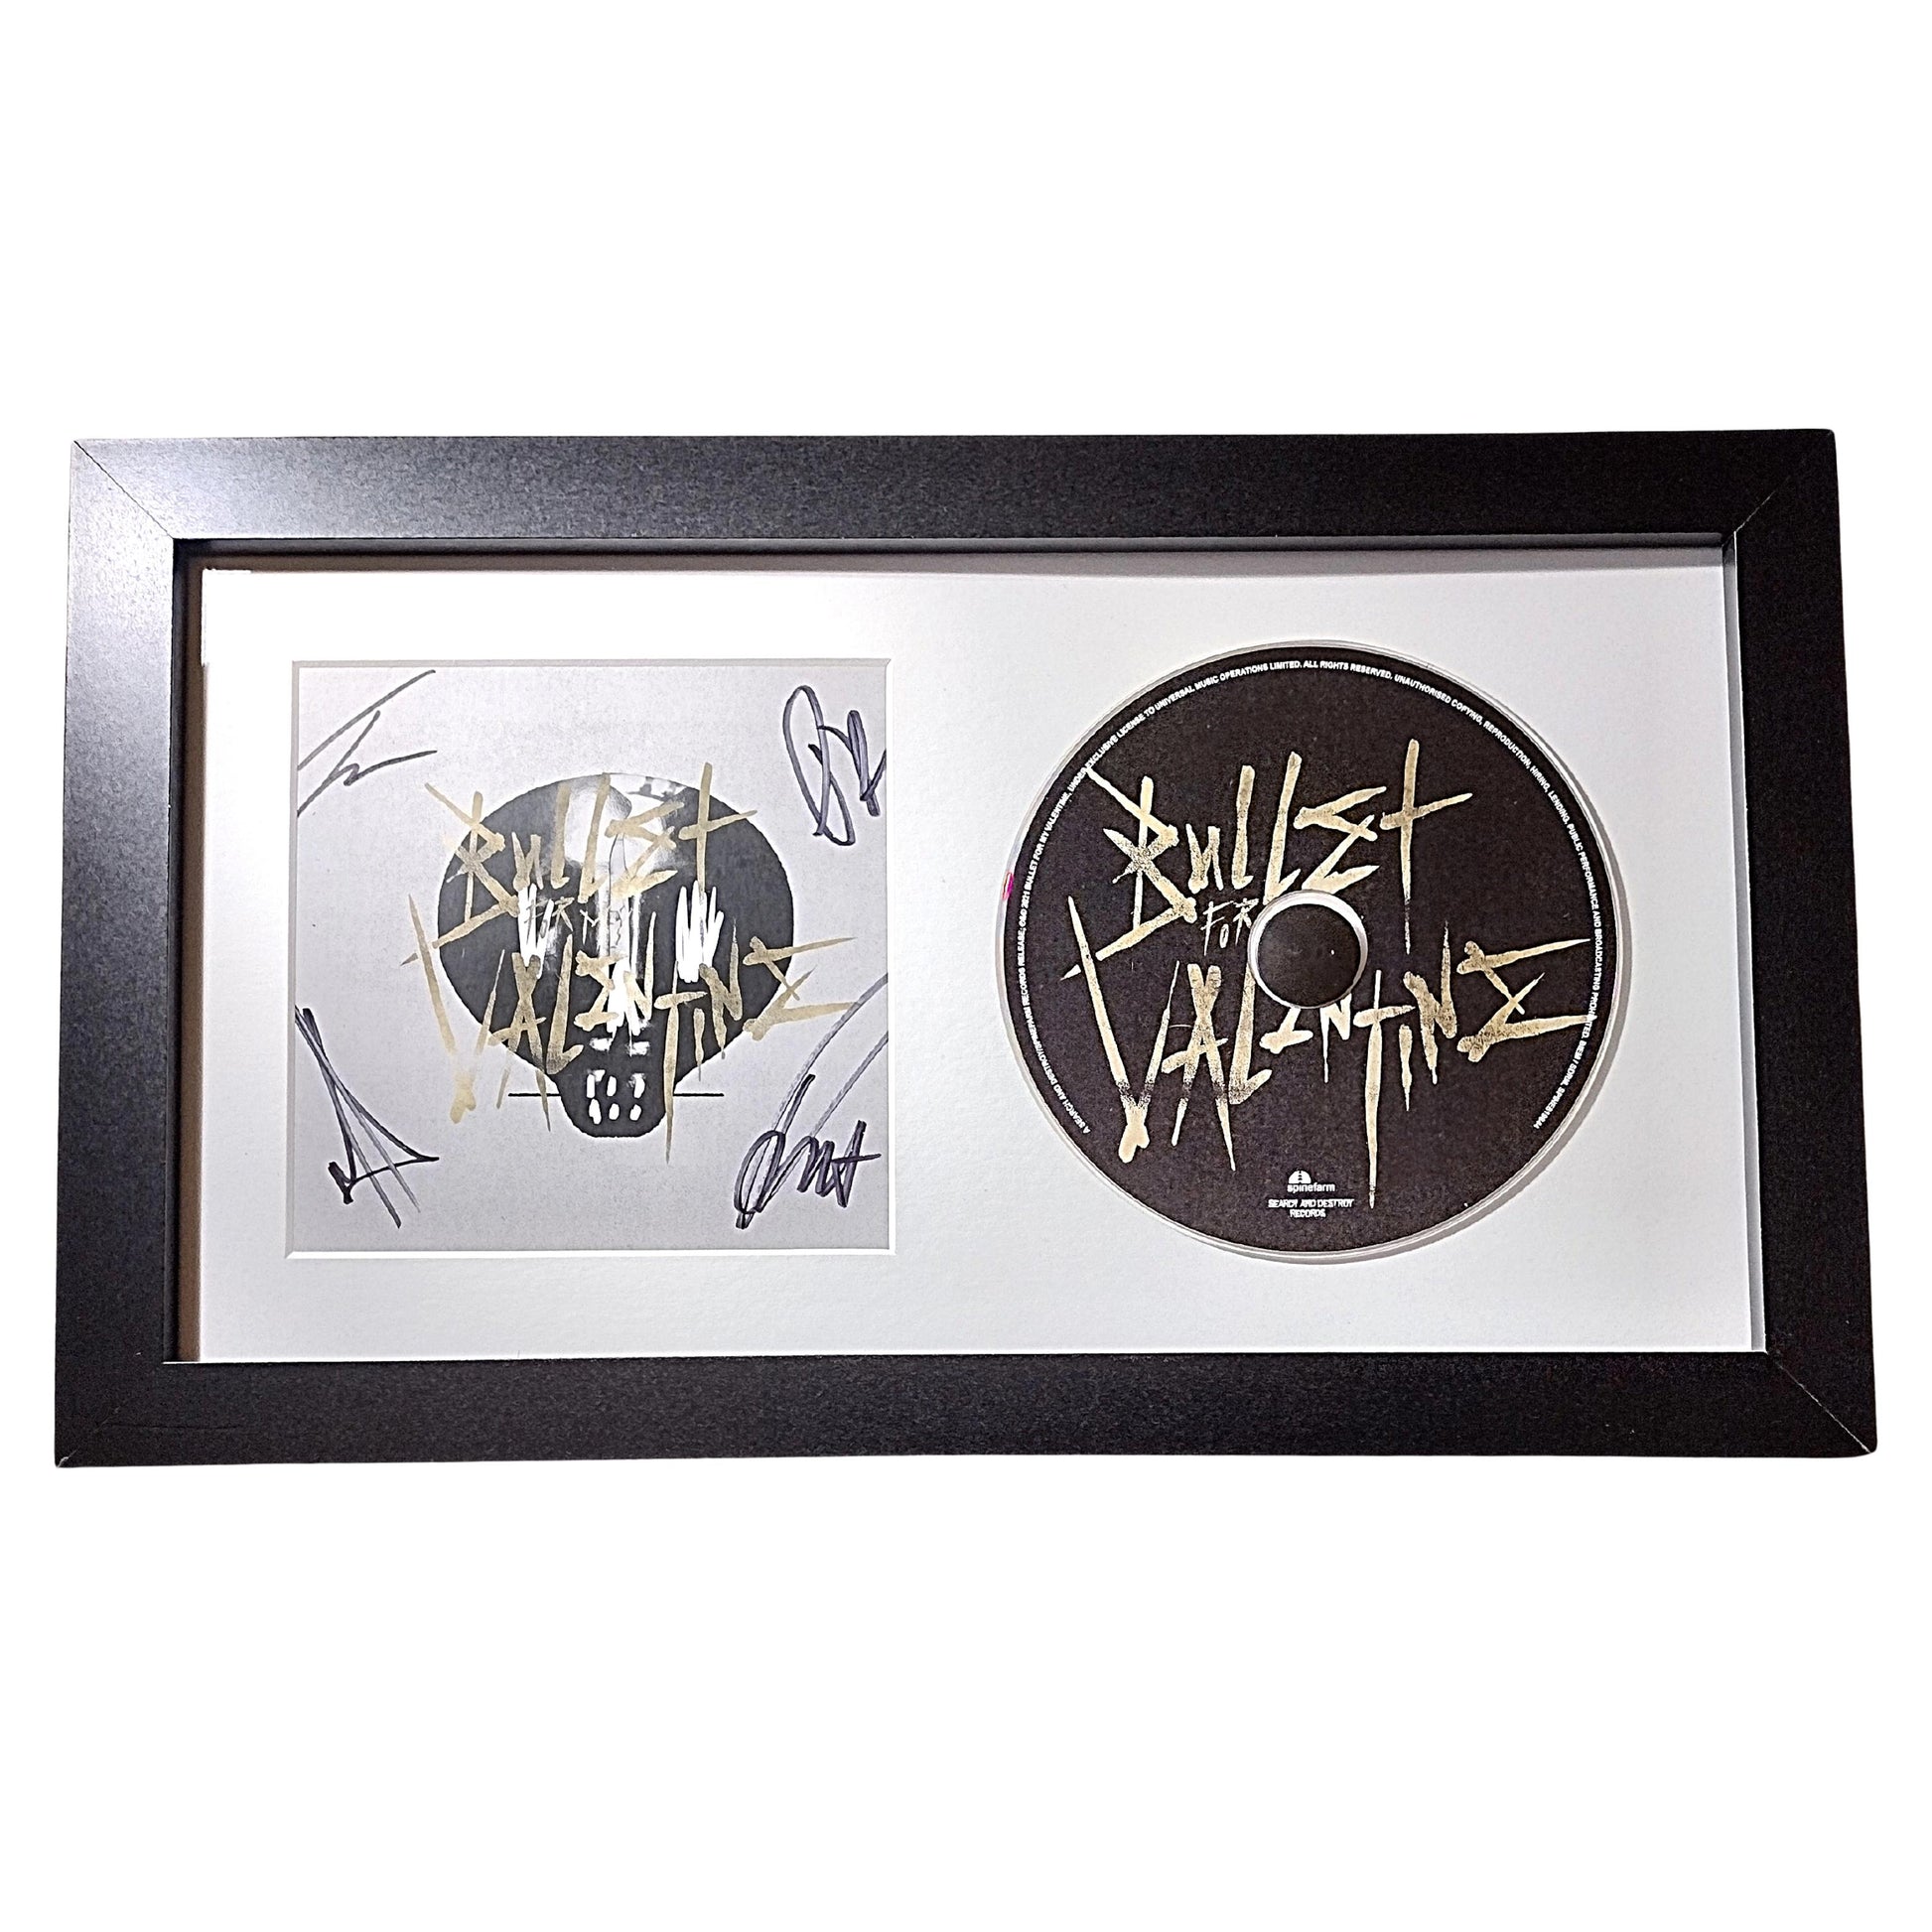 Music- Autographed- Bullet For My Valentine Signed Self Titled CD Cover Framed and Matted Wall Display Beckett Authentication 103